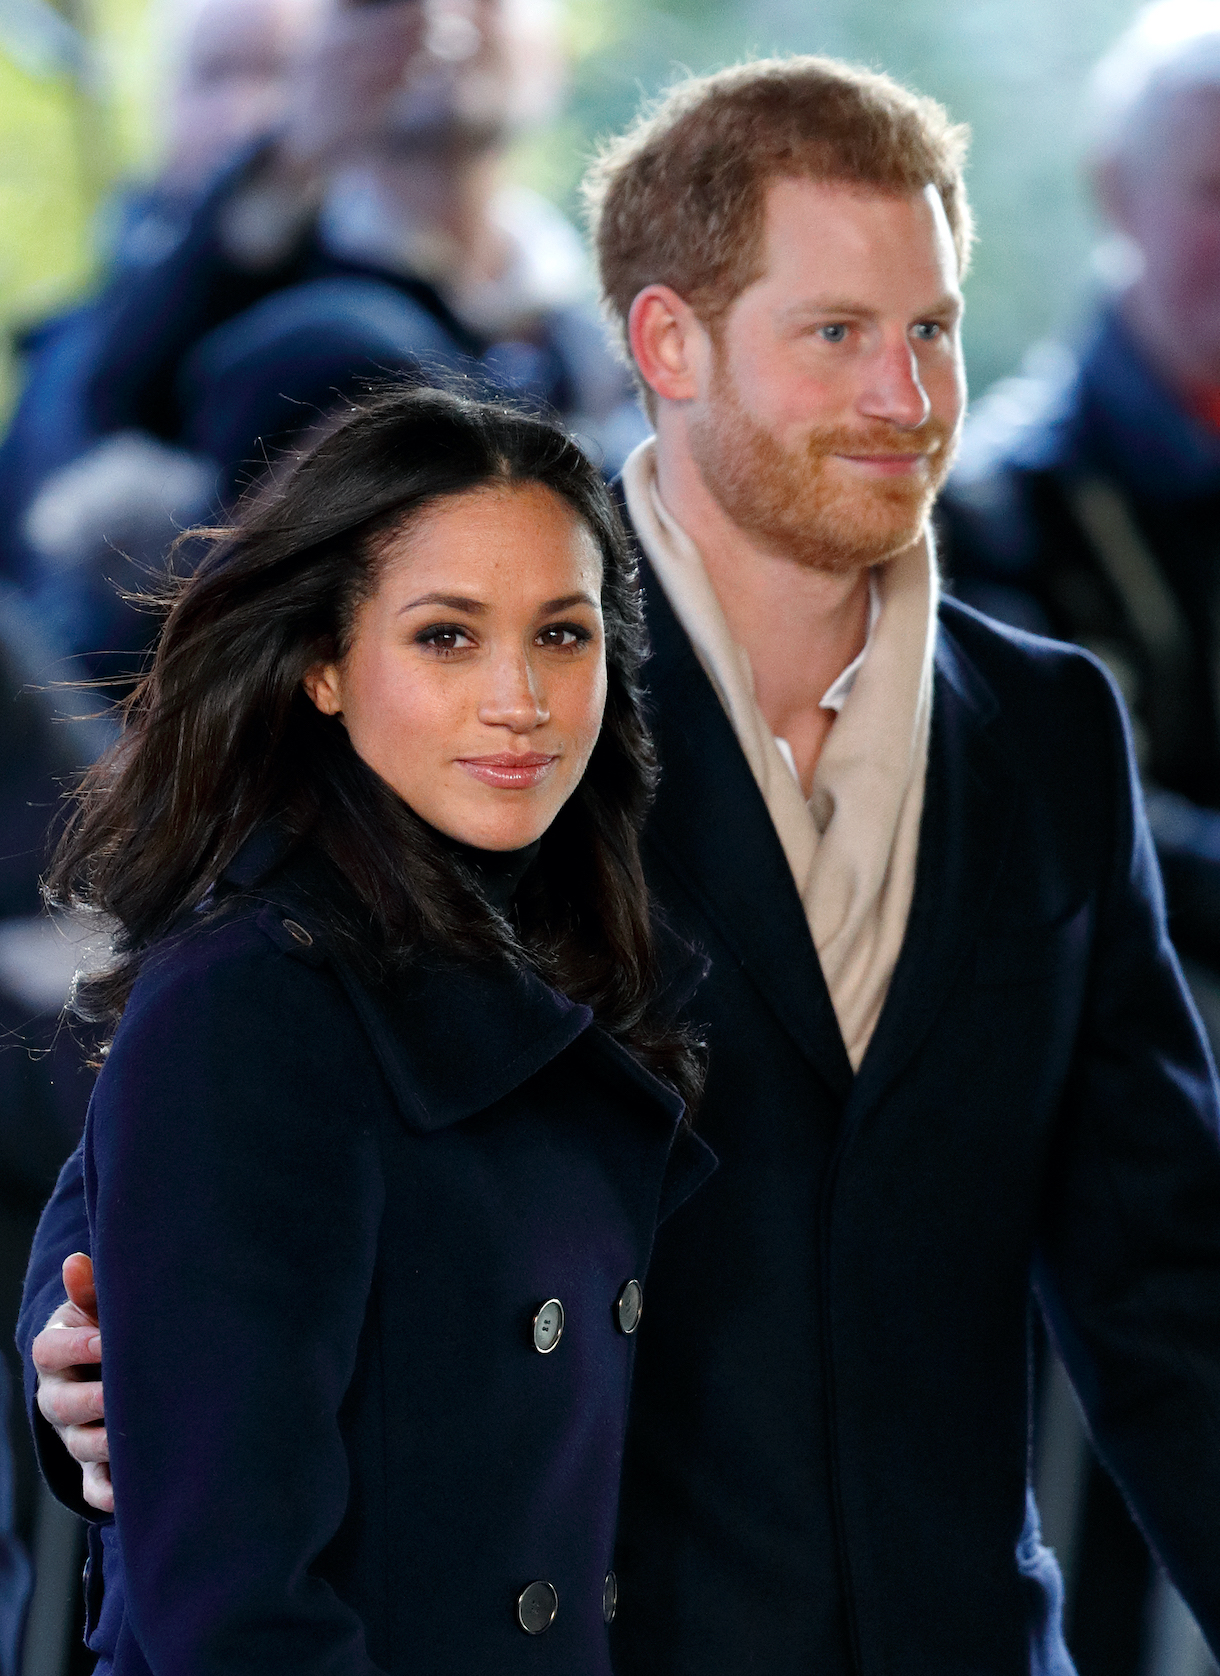 Meghan Markle and Prince Harry in Nottingham, England